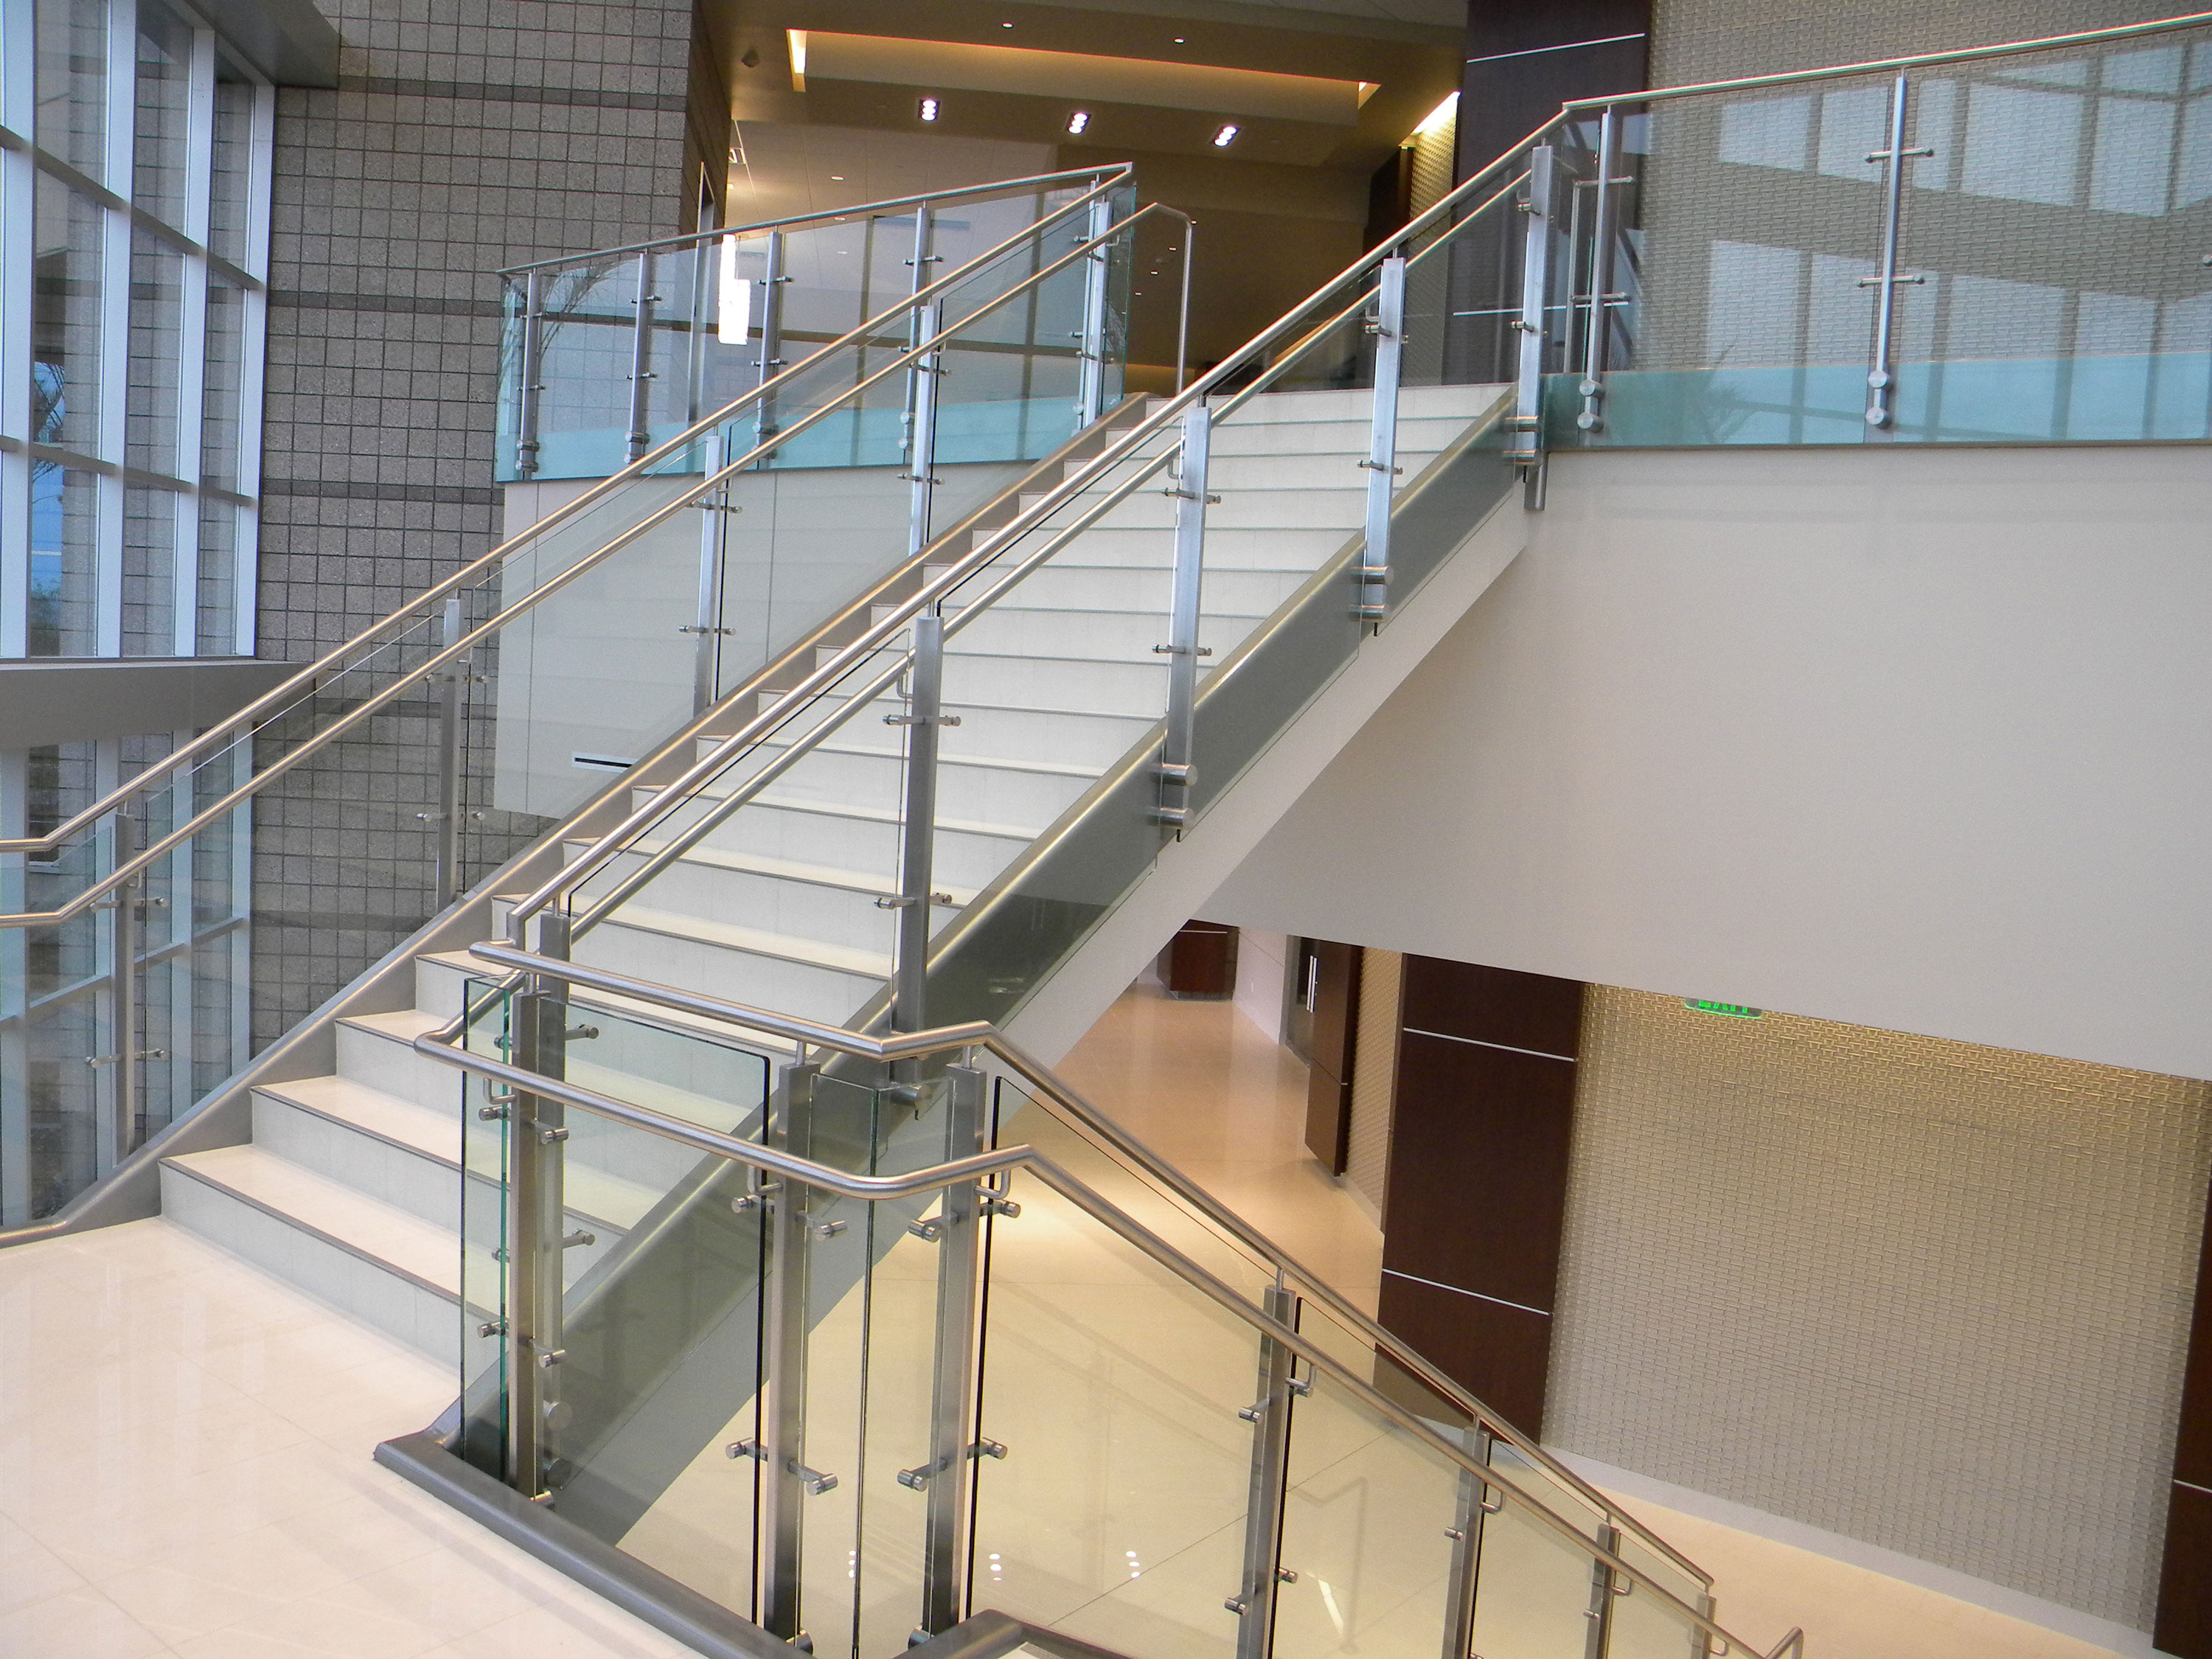 Continuim - glass with stainless steel post, cap rail and handrail.